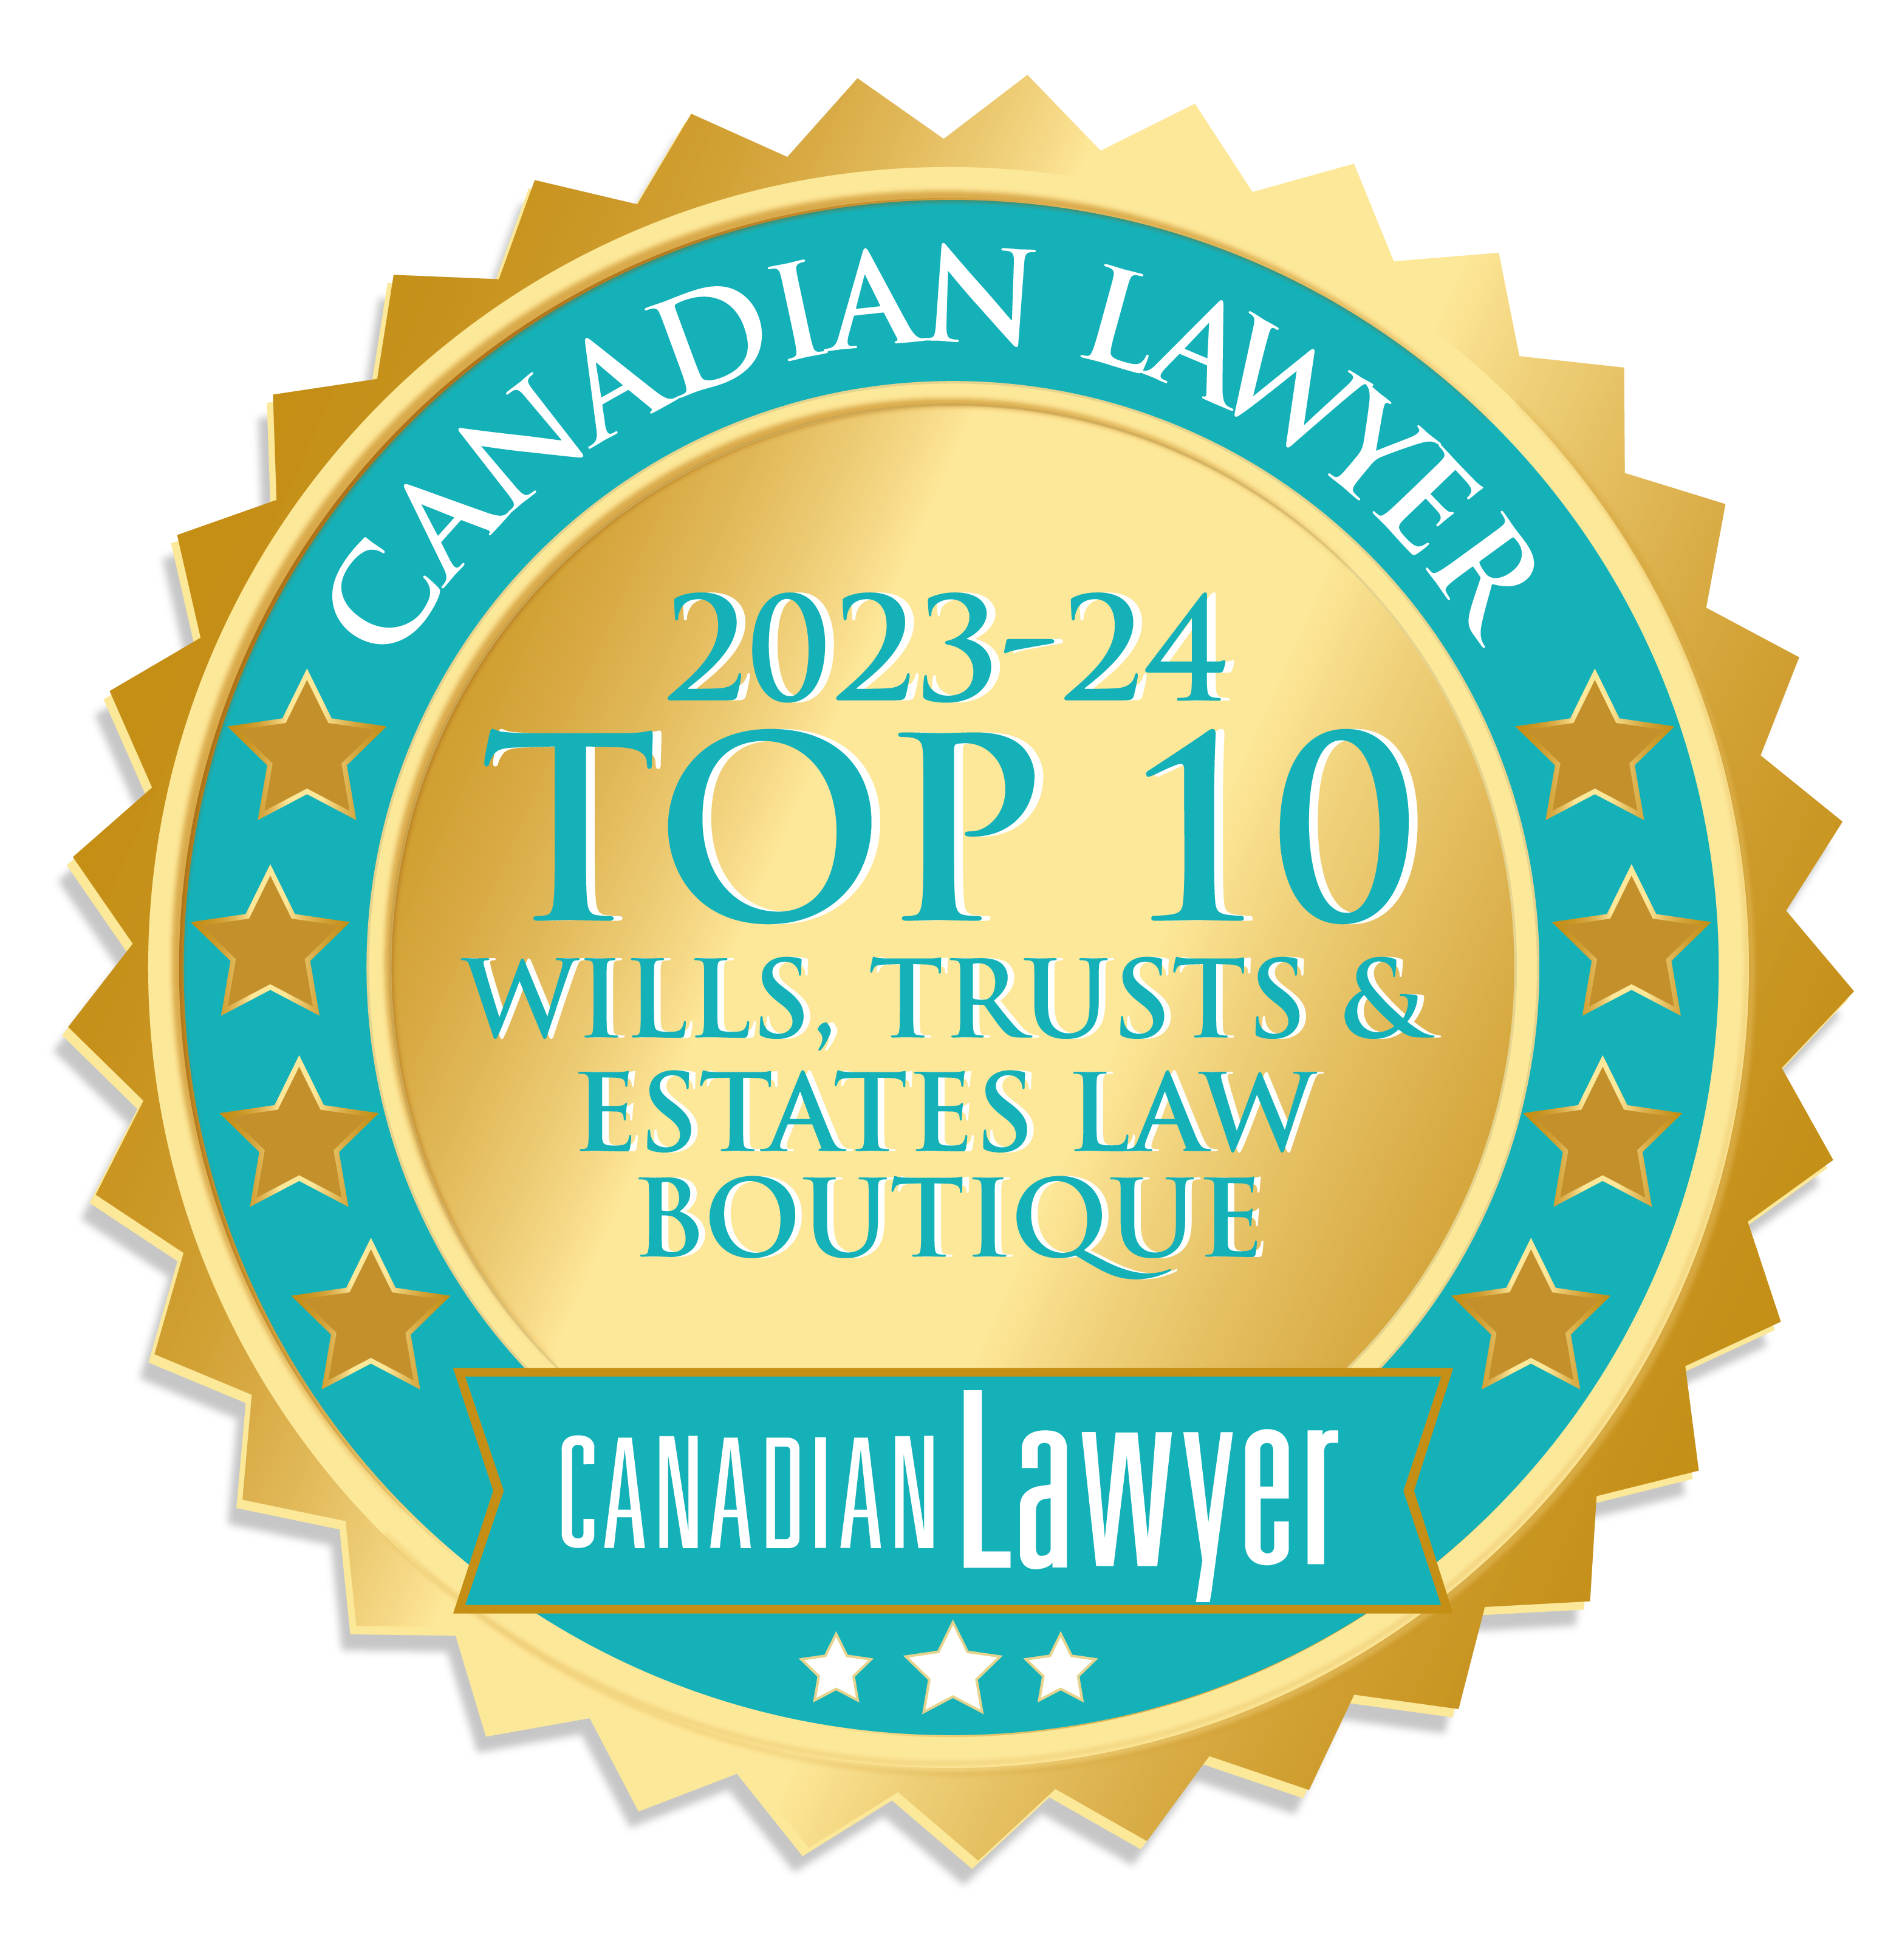 Canadian Lawyer - Top 10 Wills, Trusts and Estate Boutiques 2023-24